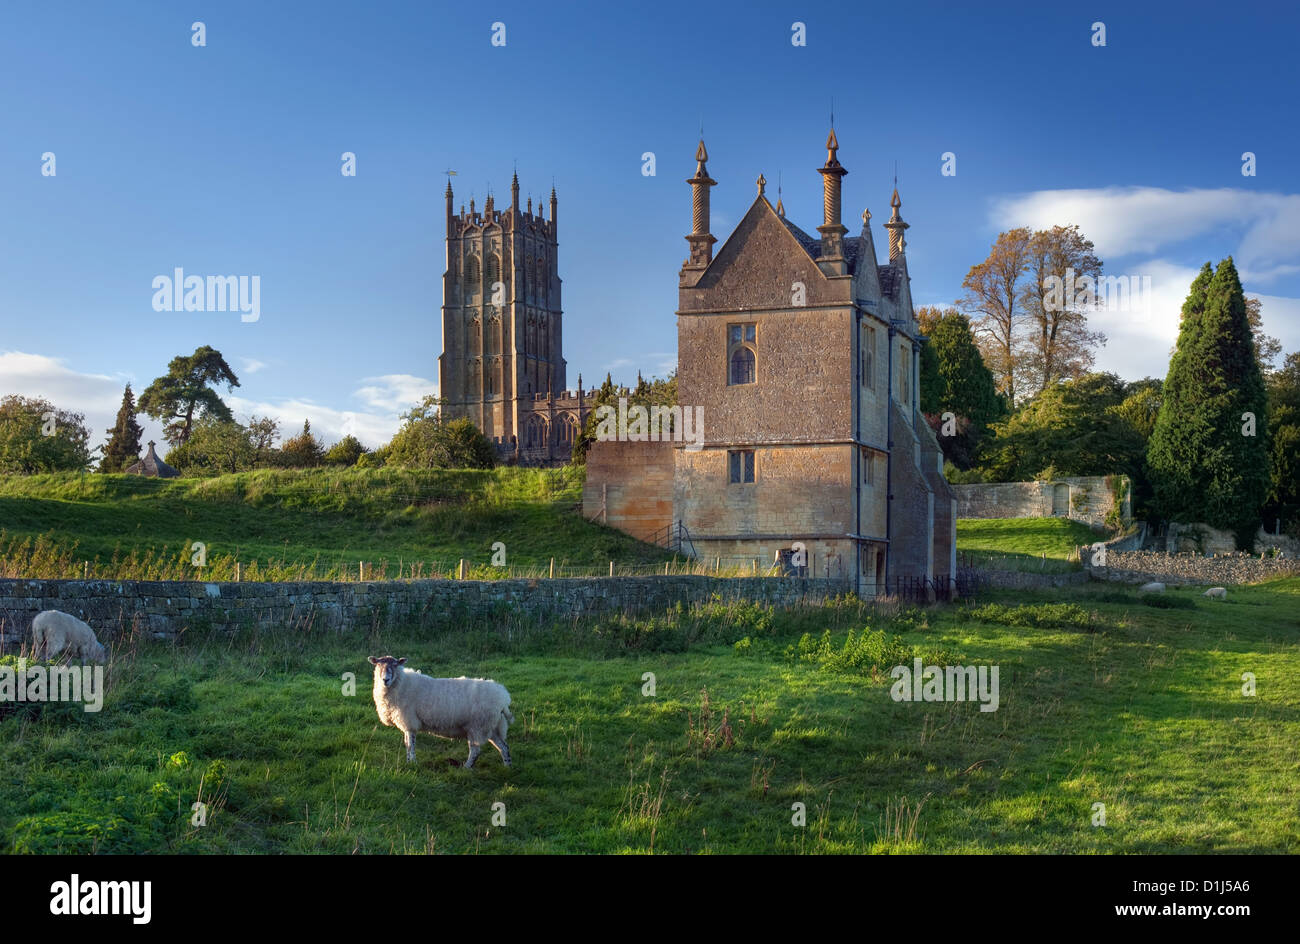 The Old Banqueting Hall and church at Chipping Campden Stock Photo